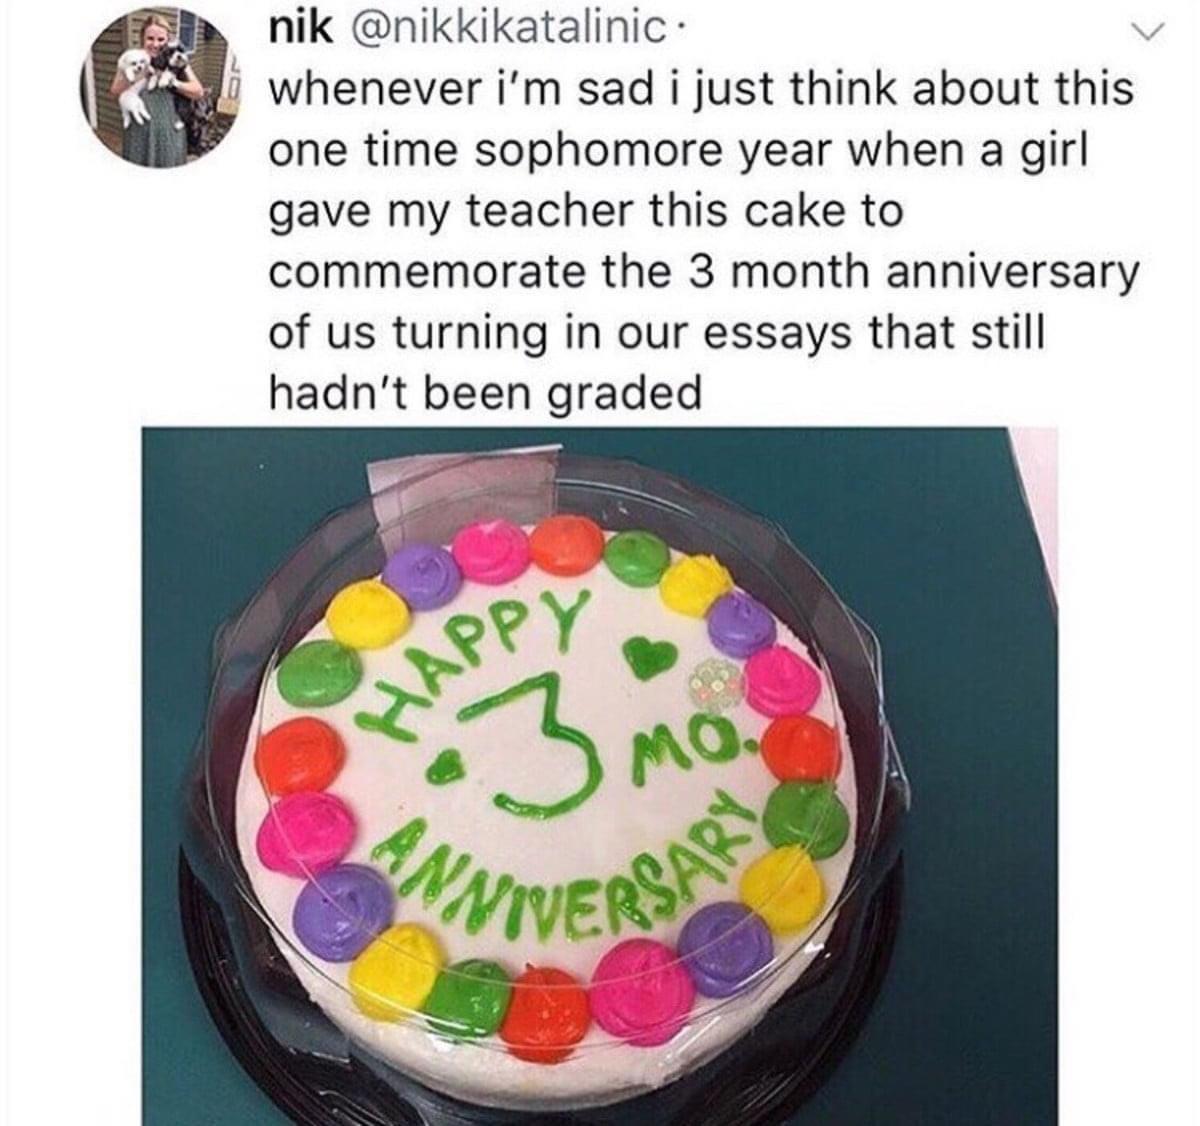 fun randoms - funny photos - happy 3 month anniversary cake - nik whenever i'm sad i just think about this one time sophomore year when a girl gave my teacher this cake to commemorate the 3 month anniversary of us turning in our essays that still hadn't b